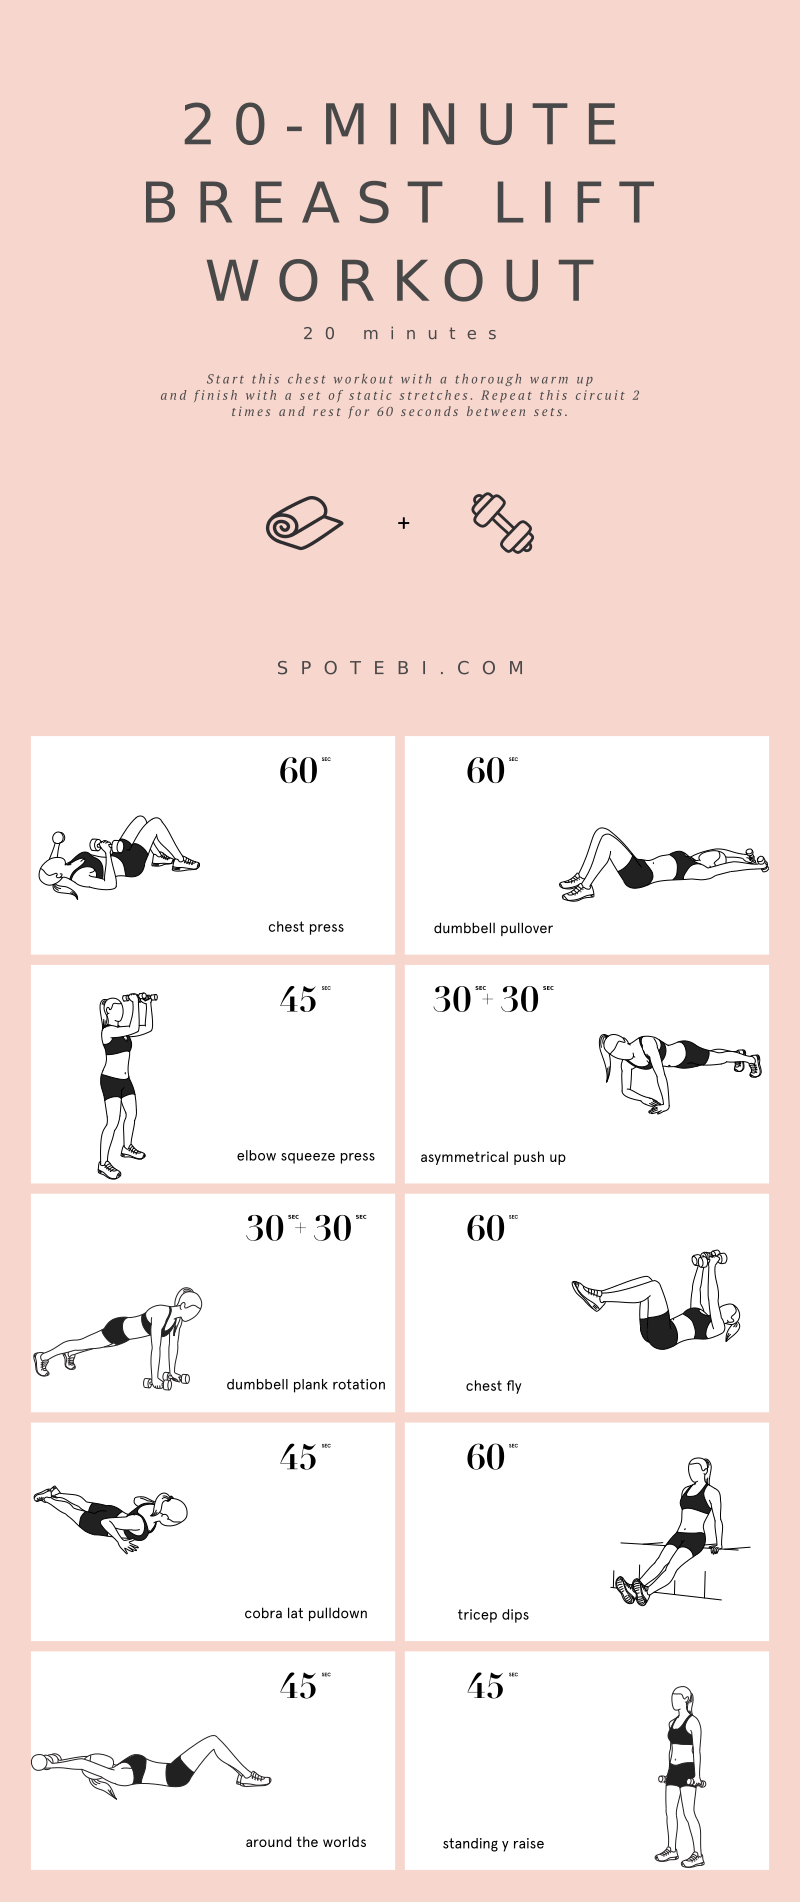 While exercise can't affect the shape of your breasts, doing the right moves can strengthen the muscles beneath them, called the pectorals. This 20-Minute Breast Lift Workout includes the best exercises to promote firmness and perkiness and give you a lifted appearance! https://www.spotebi.com/workout-routines/20-minute-breast-lift-workout/